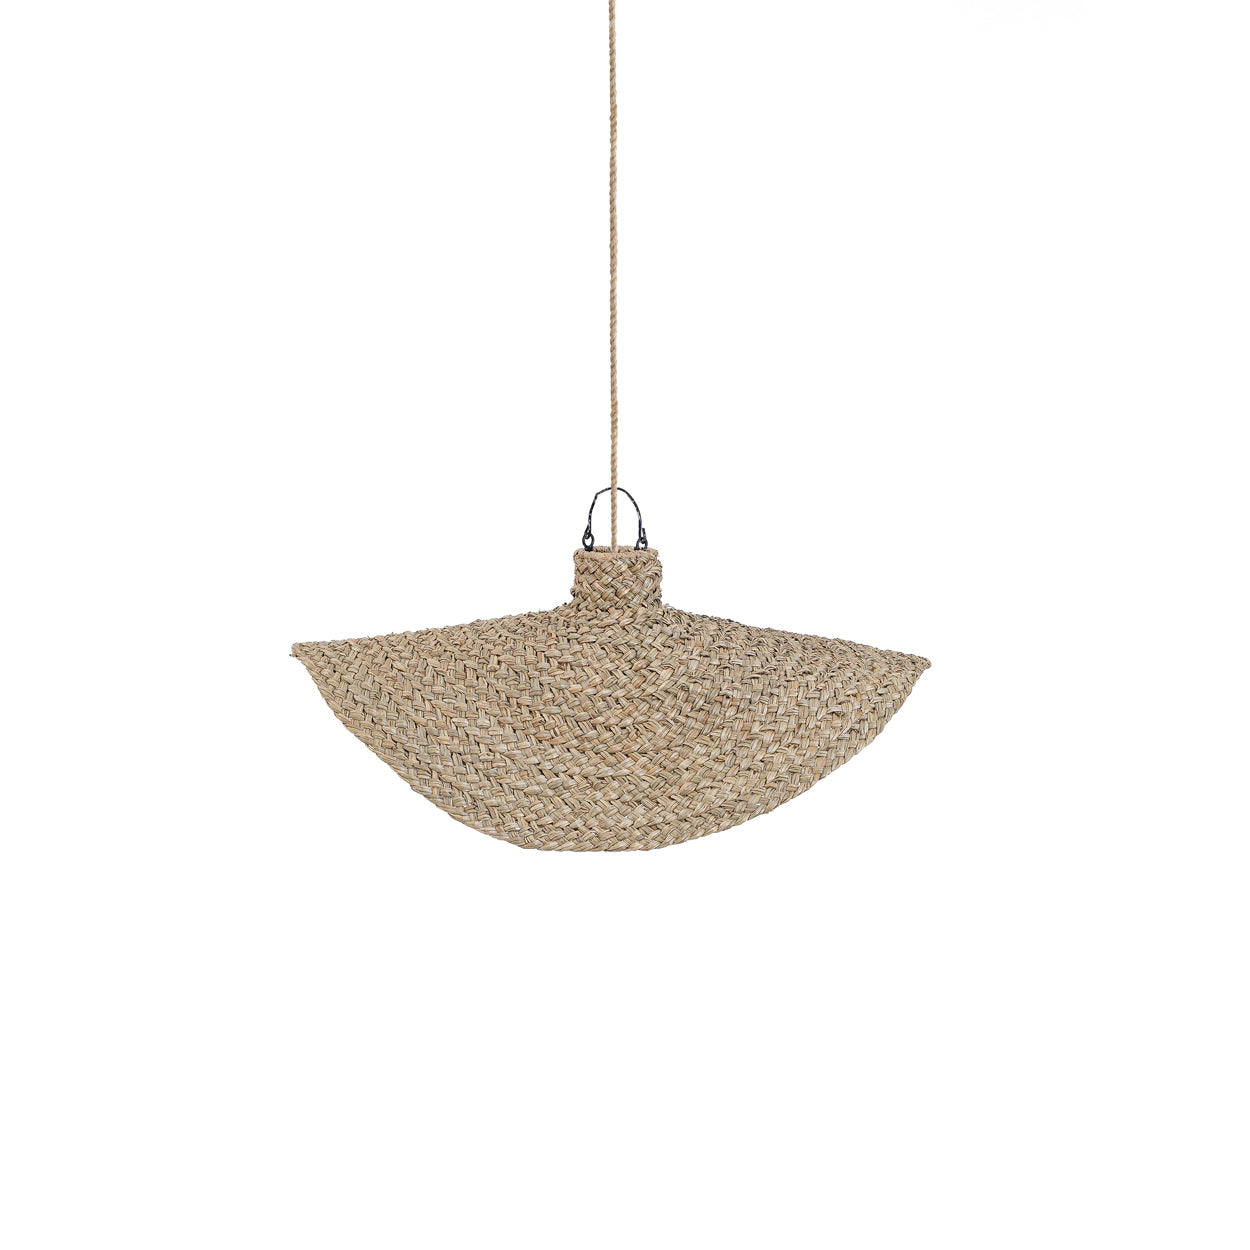 The Qubba Pendant - Natural - 60